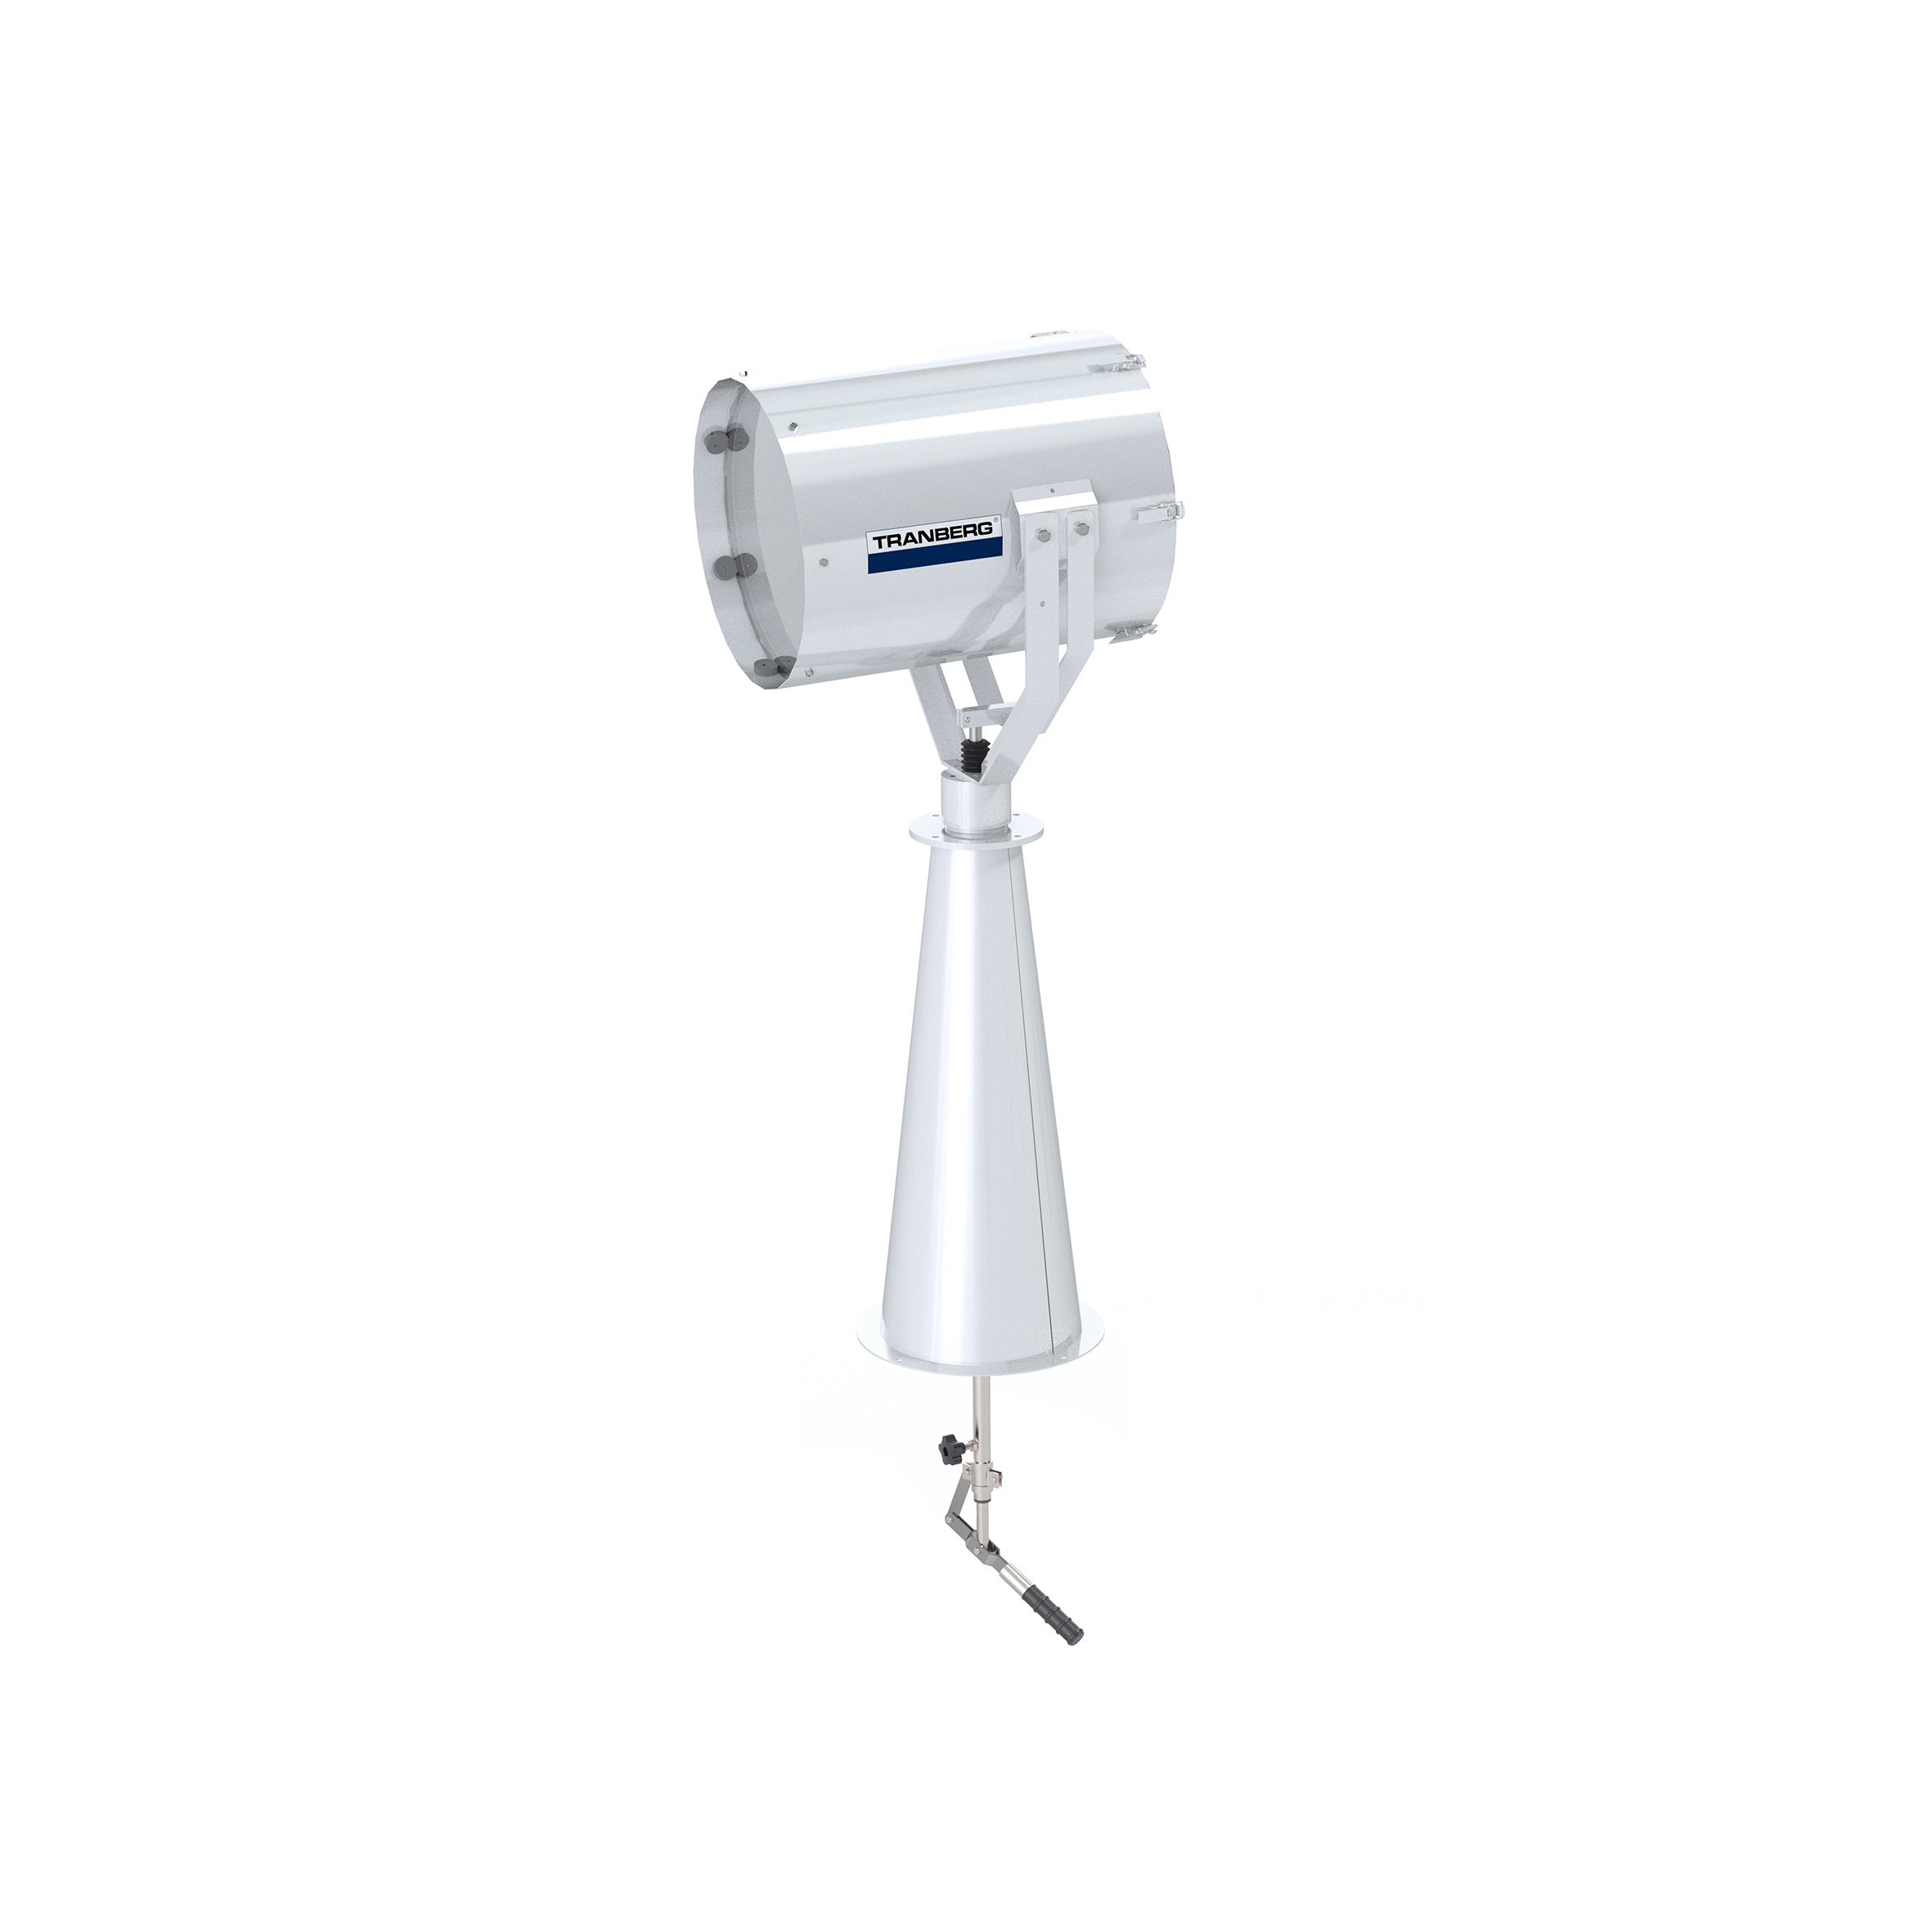 TEF 2630 Searchlight: Halogen 1000W bulb incl, 230V, Bridge Controlled, Stainless Steel, W/800 mm pe